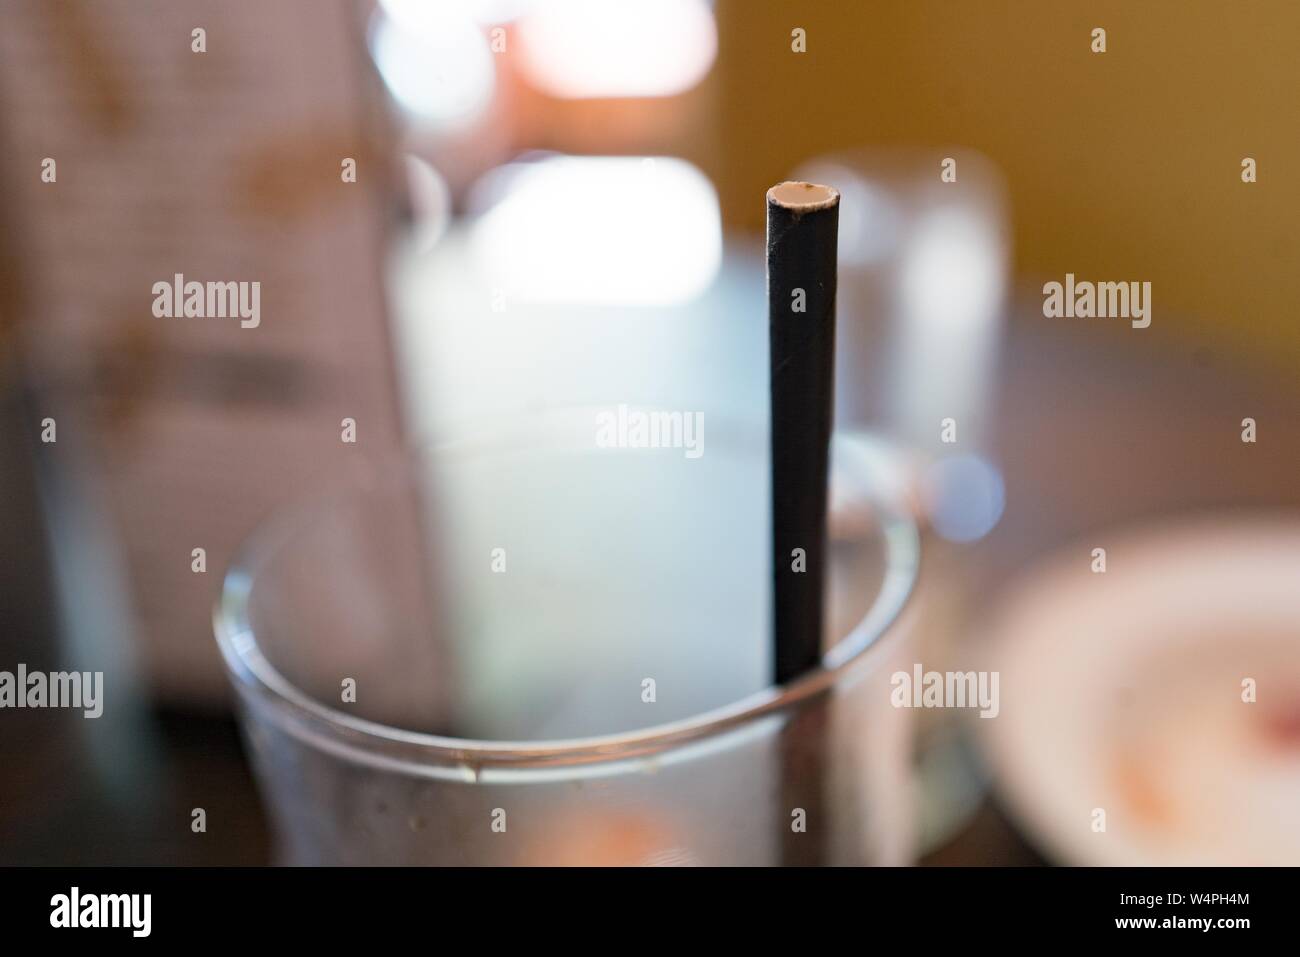 Close-up of a paper drinking straw in a beverage glass; many cities, including San Francisco, have enacted or considered bans on plastic drinking straws, with many restaurants using paper alternatives, Lafayette, California, September 10, 2018. () Stock Photo